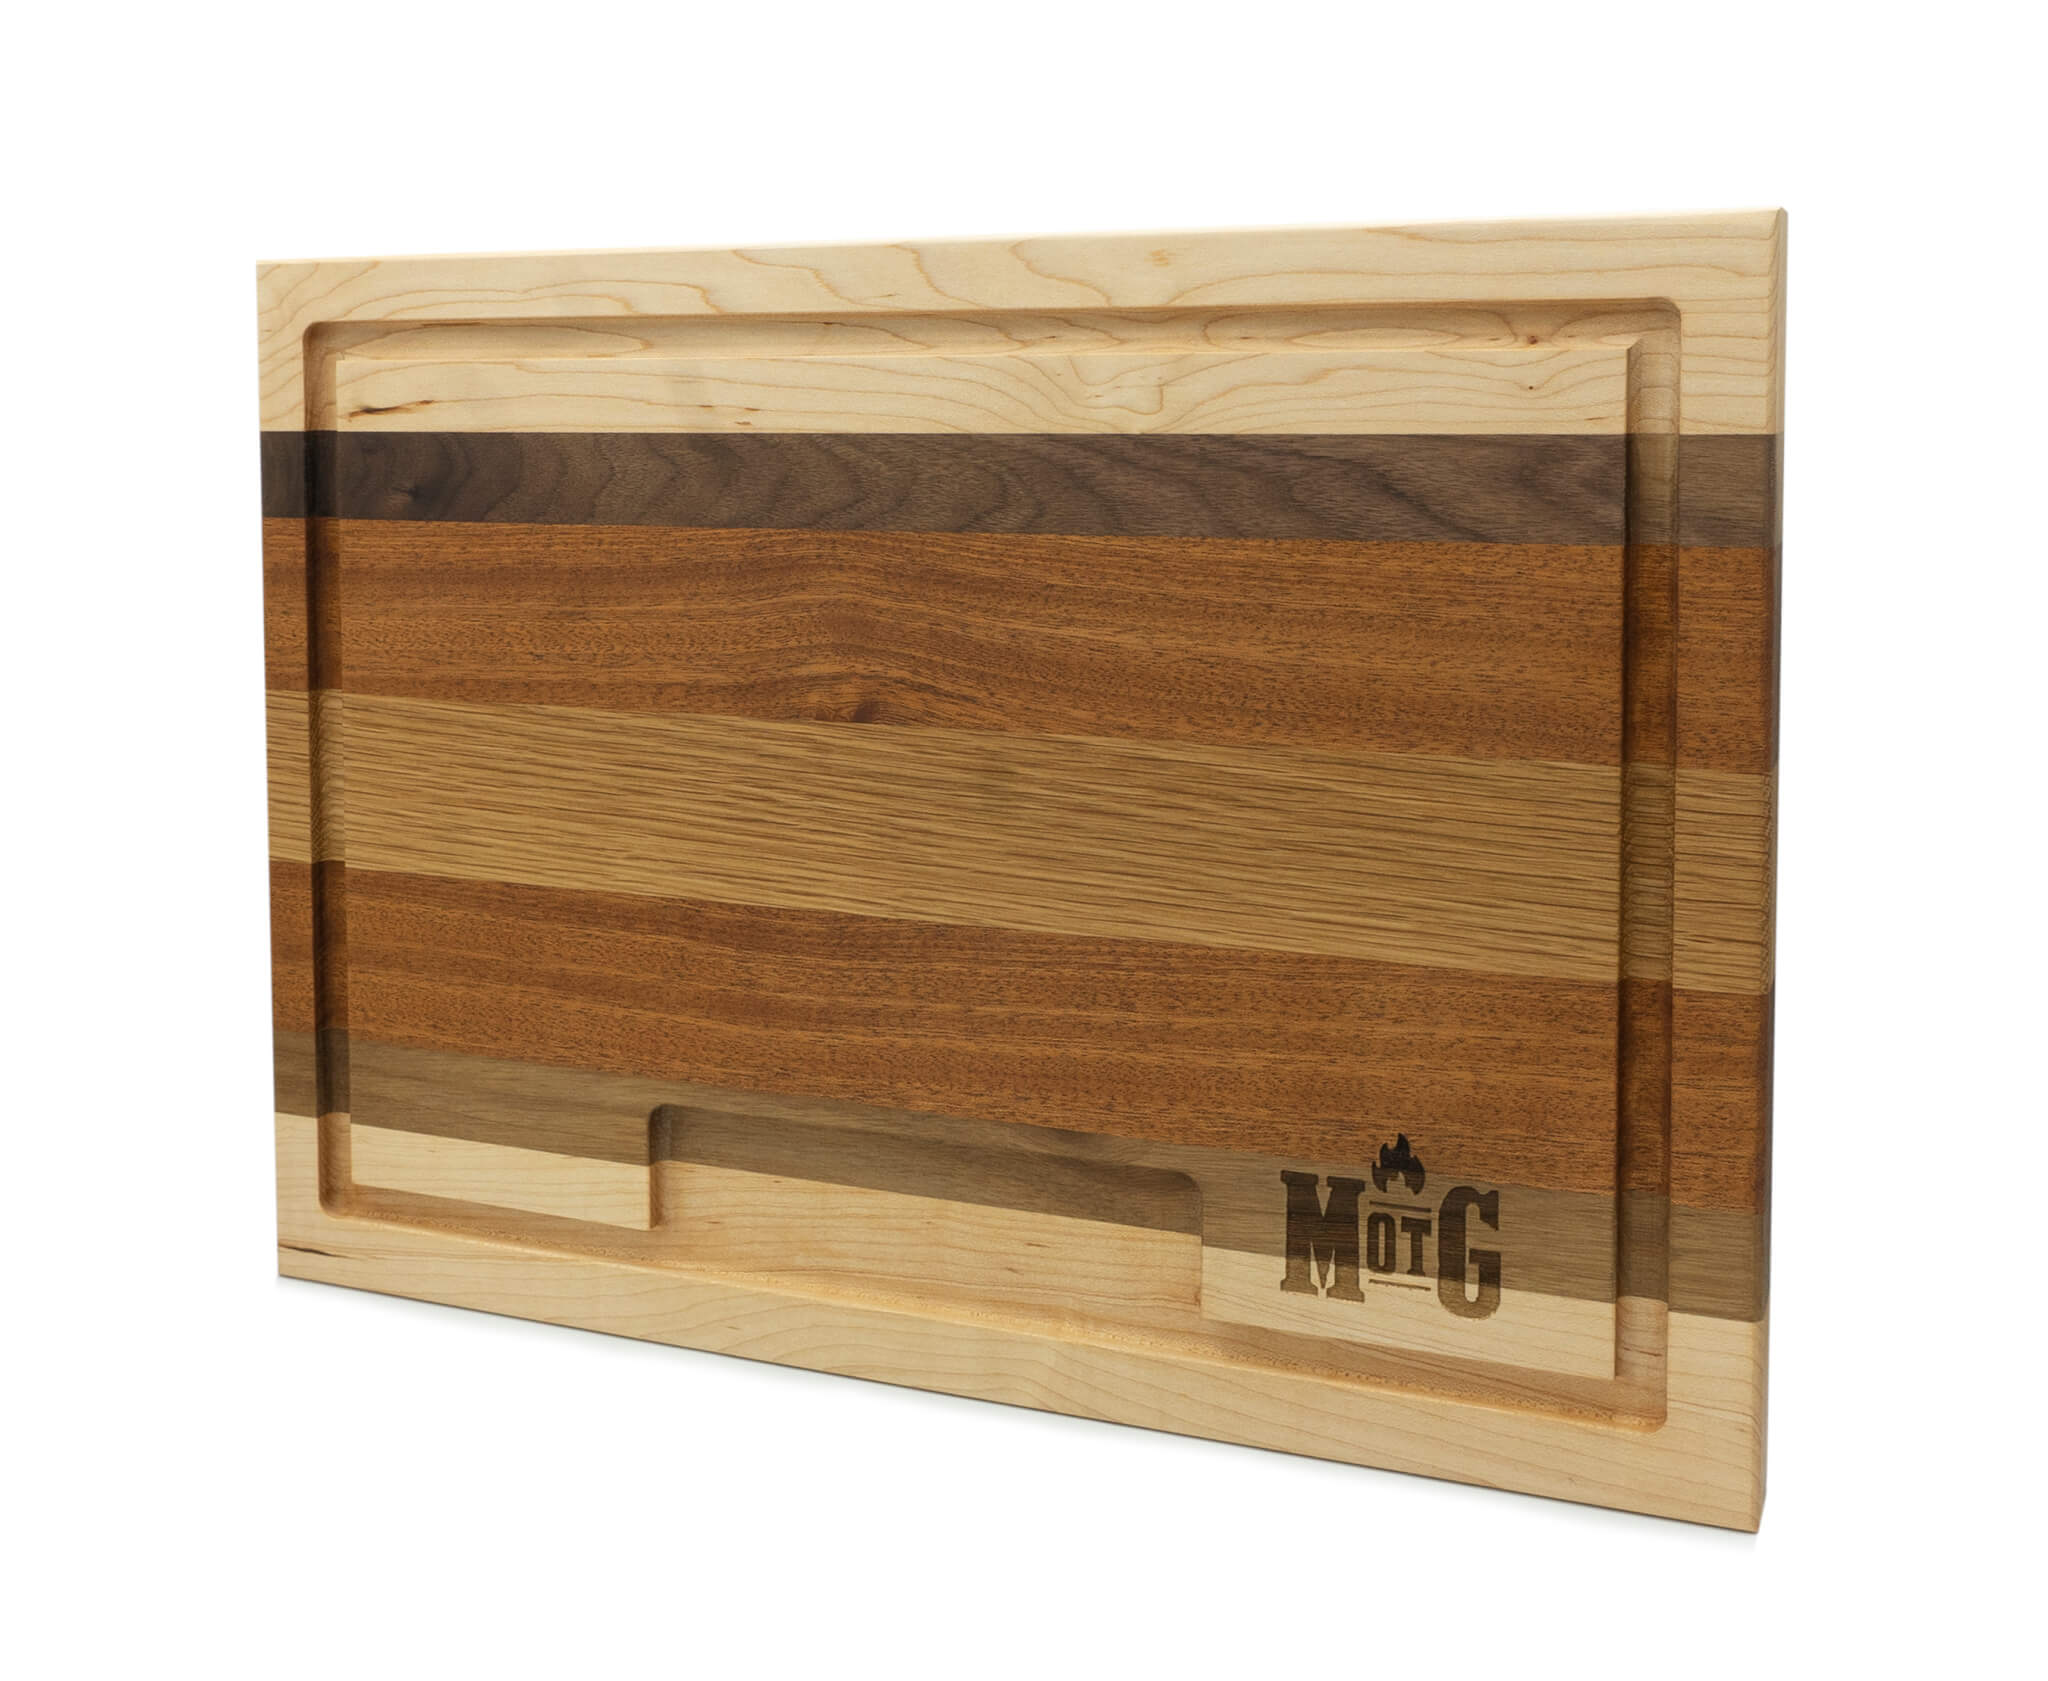 MOTG-FLJT11216 (Cutting Boards 1 x 12 x 16 with Juice Tray & Flame logo)